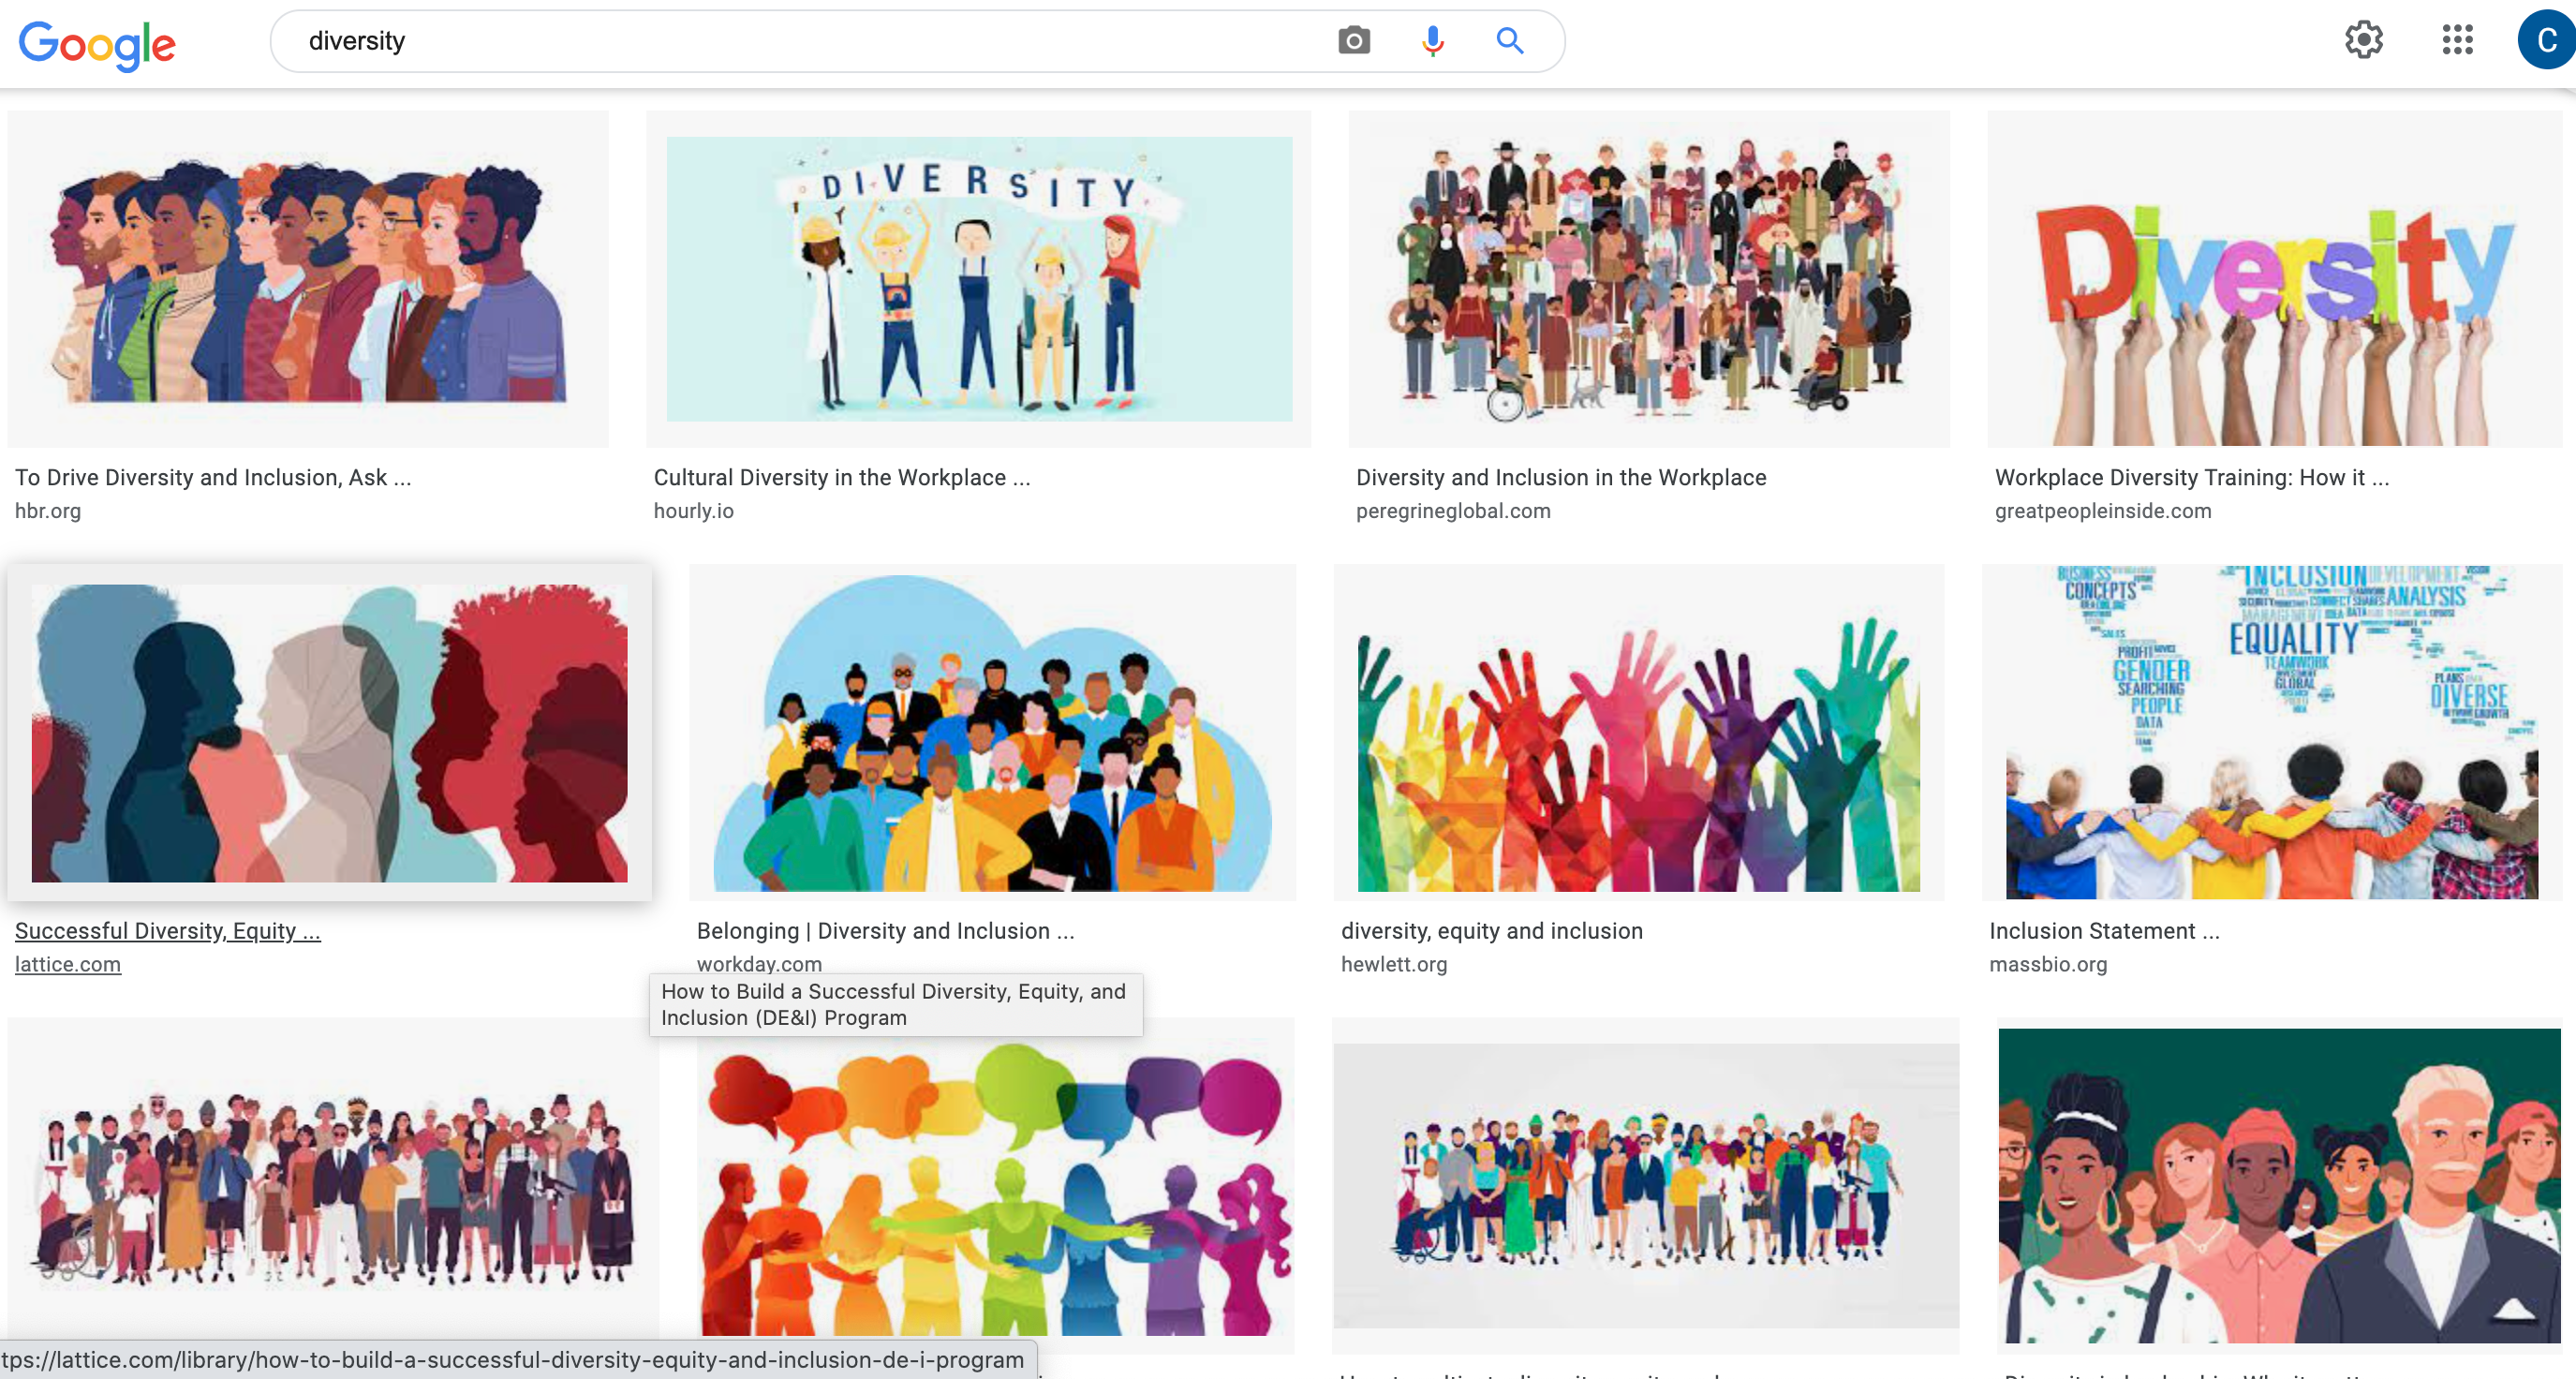 Google image search for "diversity"